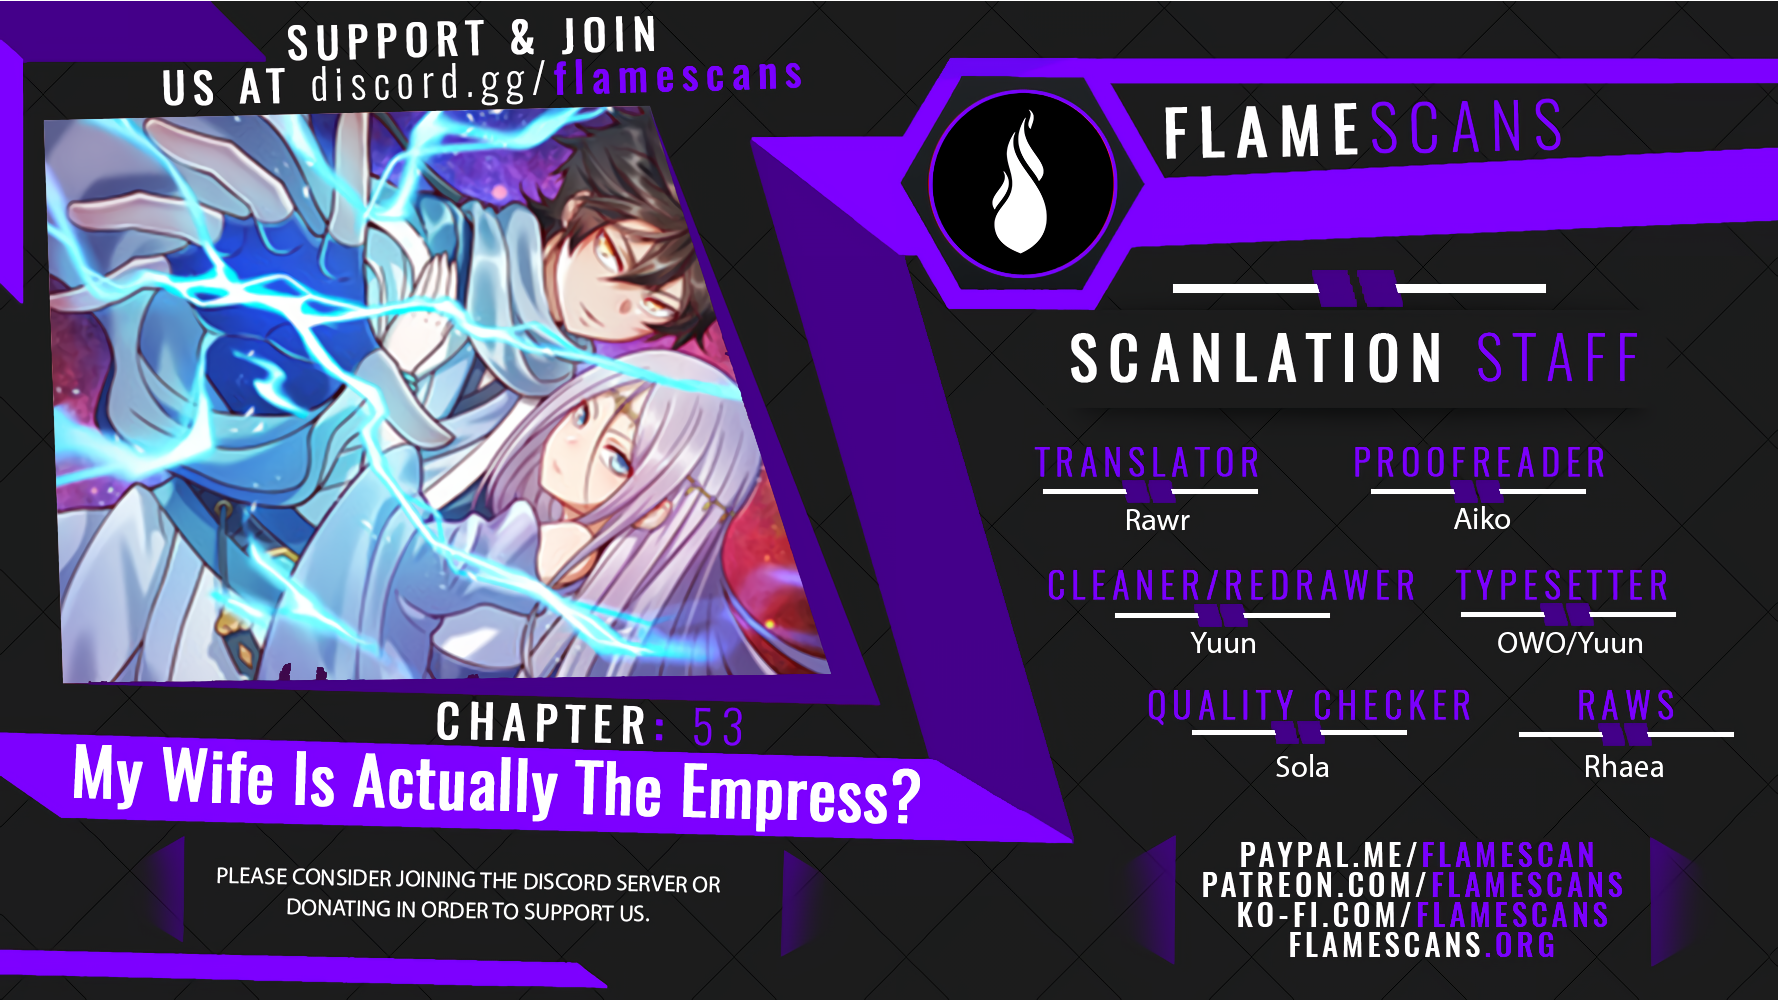 My Wife Is Actually The Empress? - Chapter 11919 - Image 1